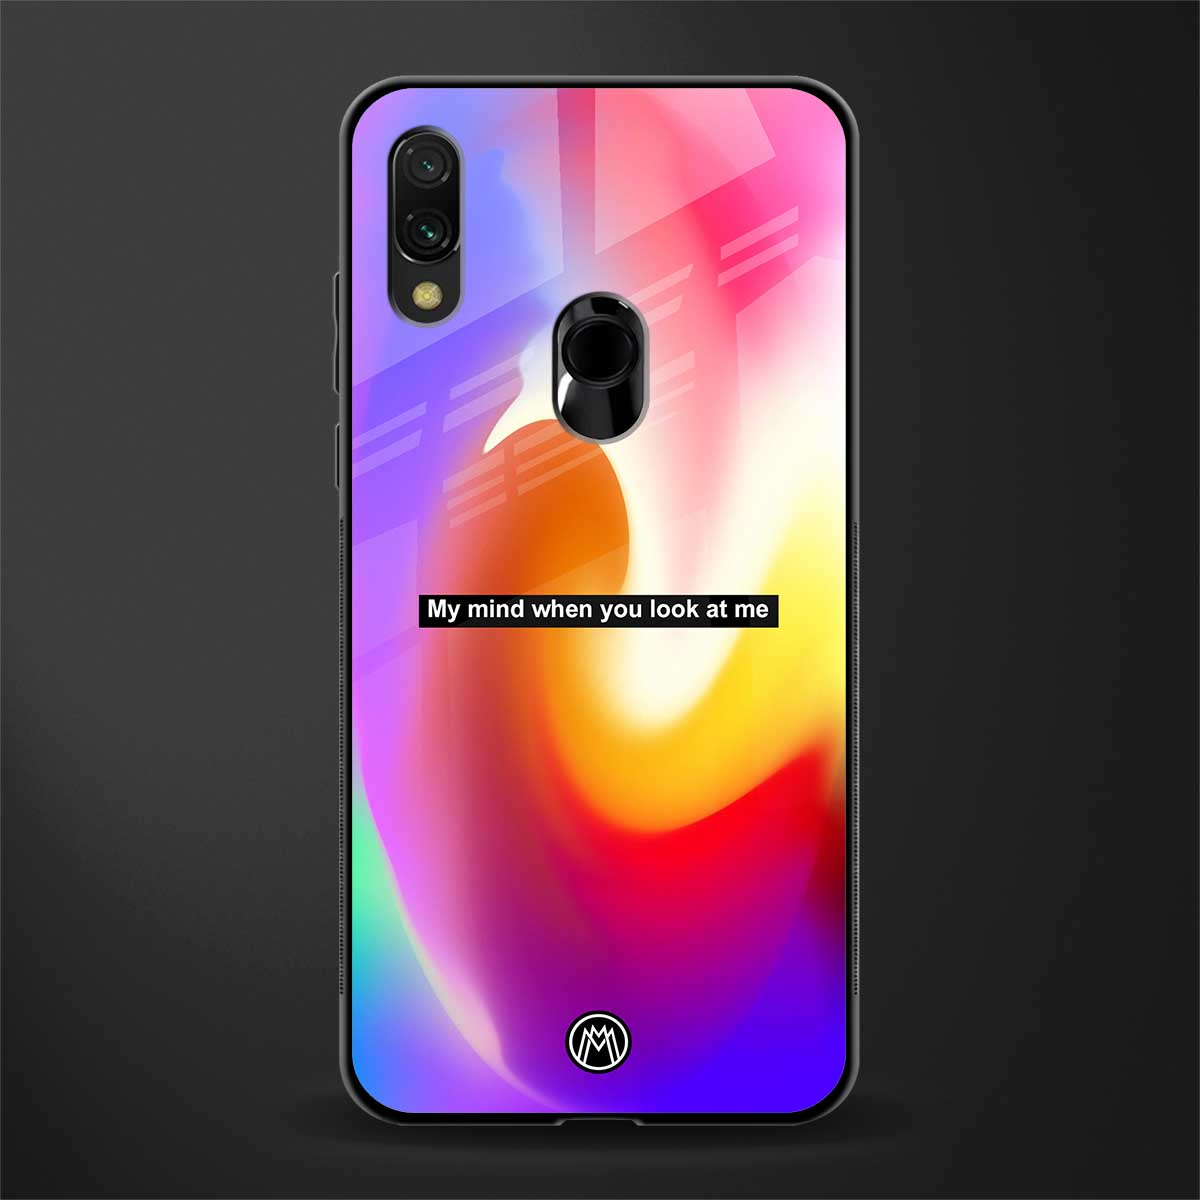 when you look at me glass case for redmi note 7 pro image